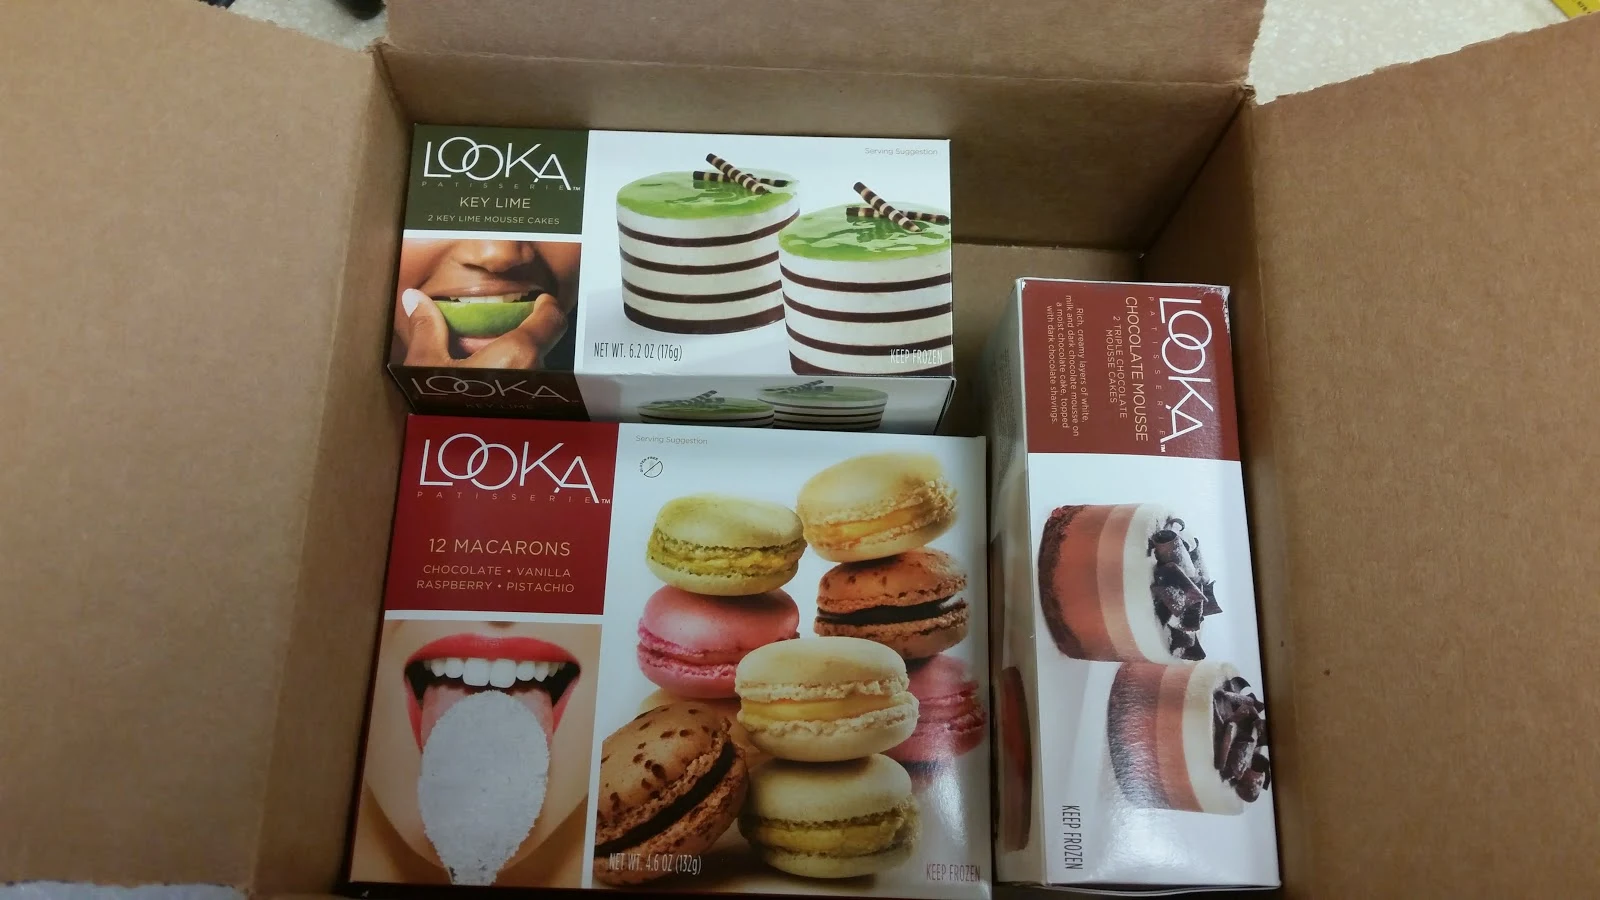 LOOKA Patisserie French Desserts Review and Giveaway Ends 7/14 via ProductReviewMom.com #frenchdesserts